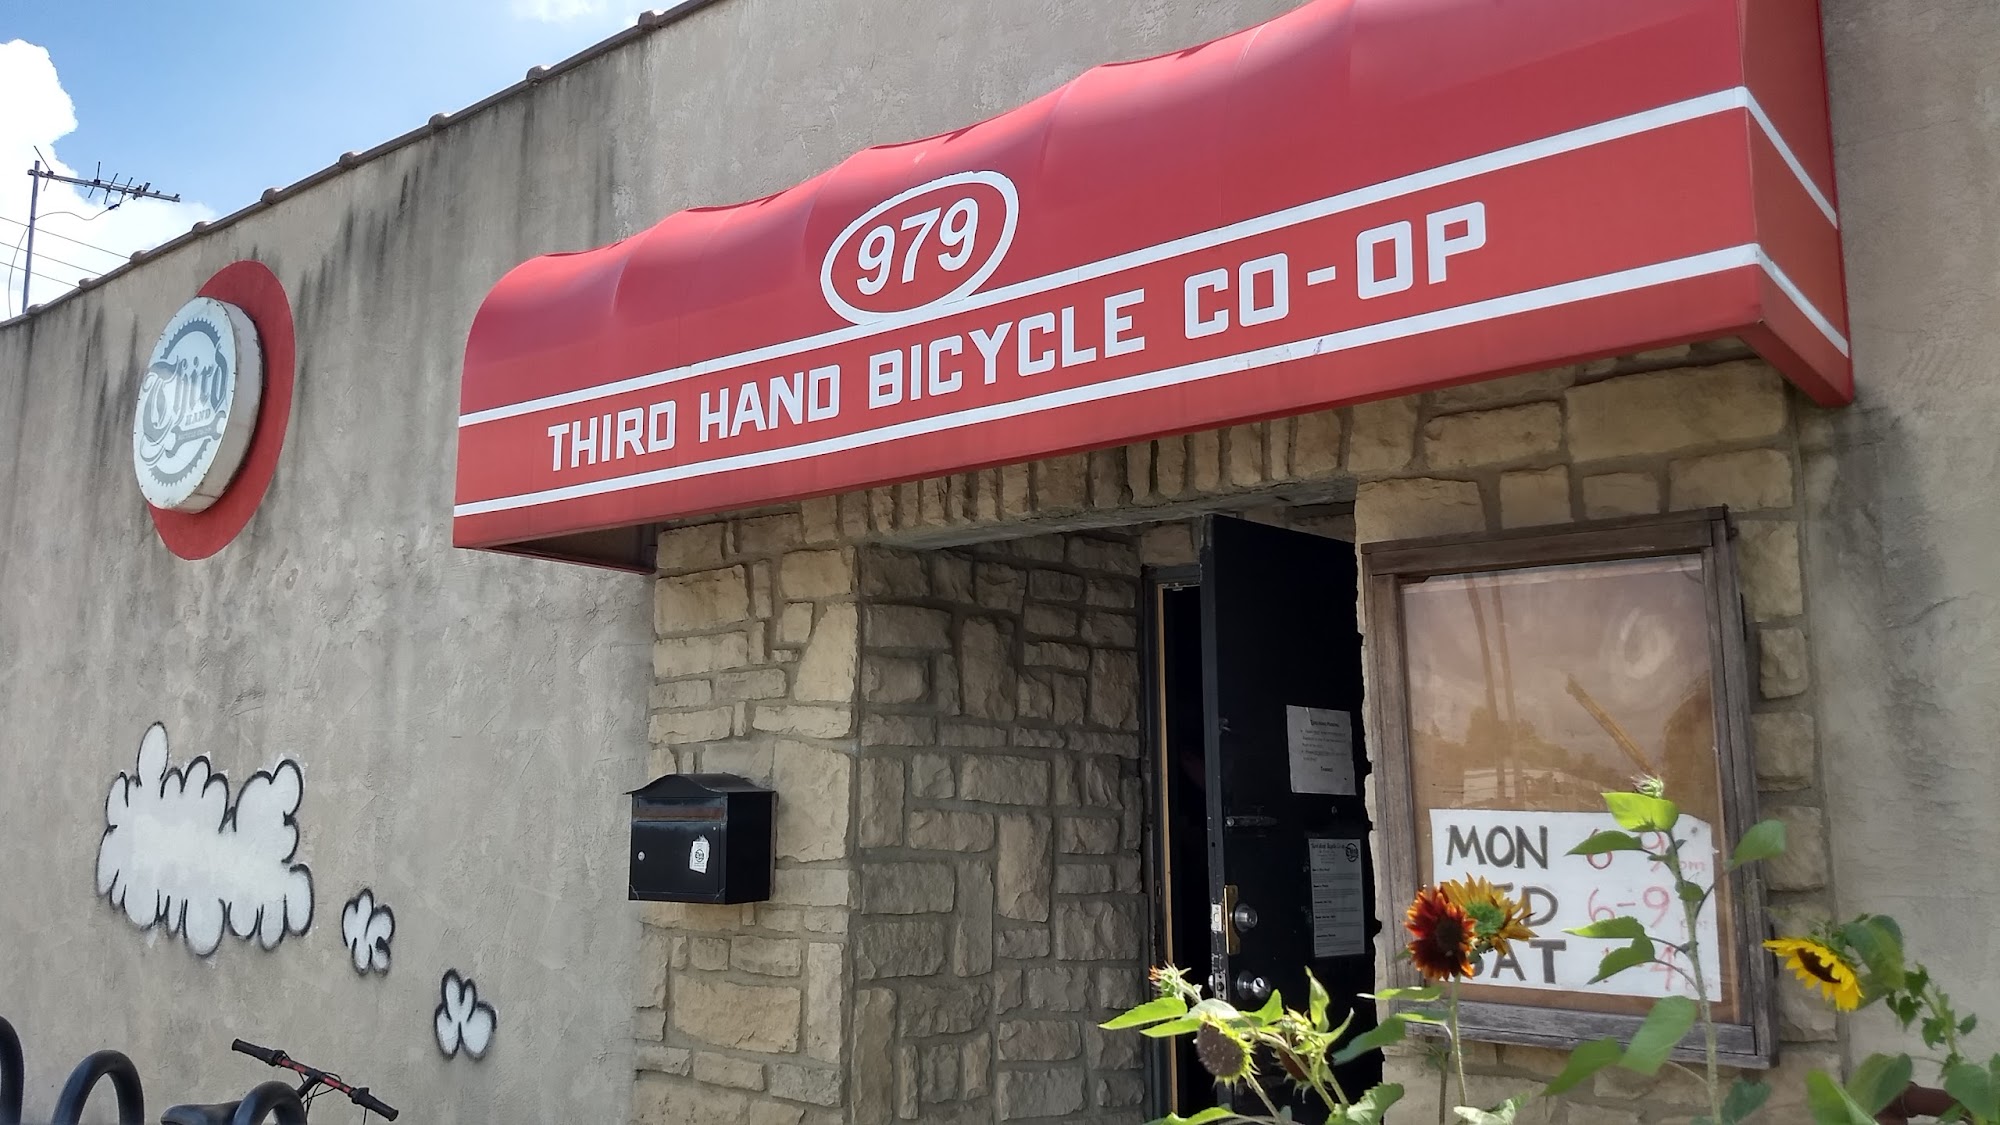 Third Hand Bicycle Co-Op